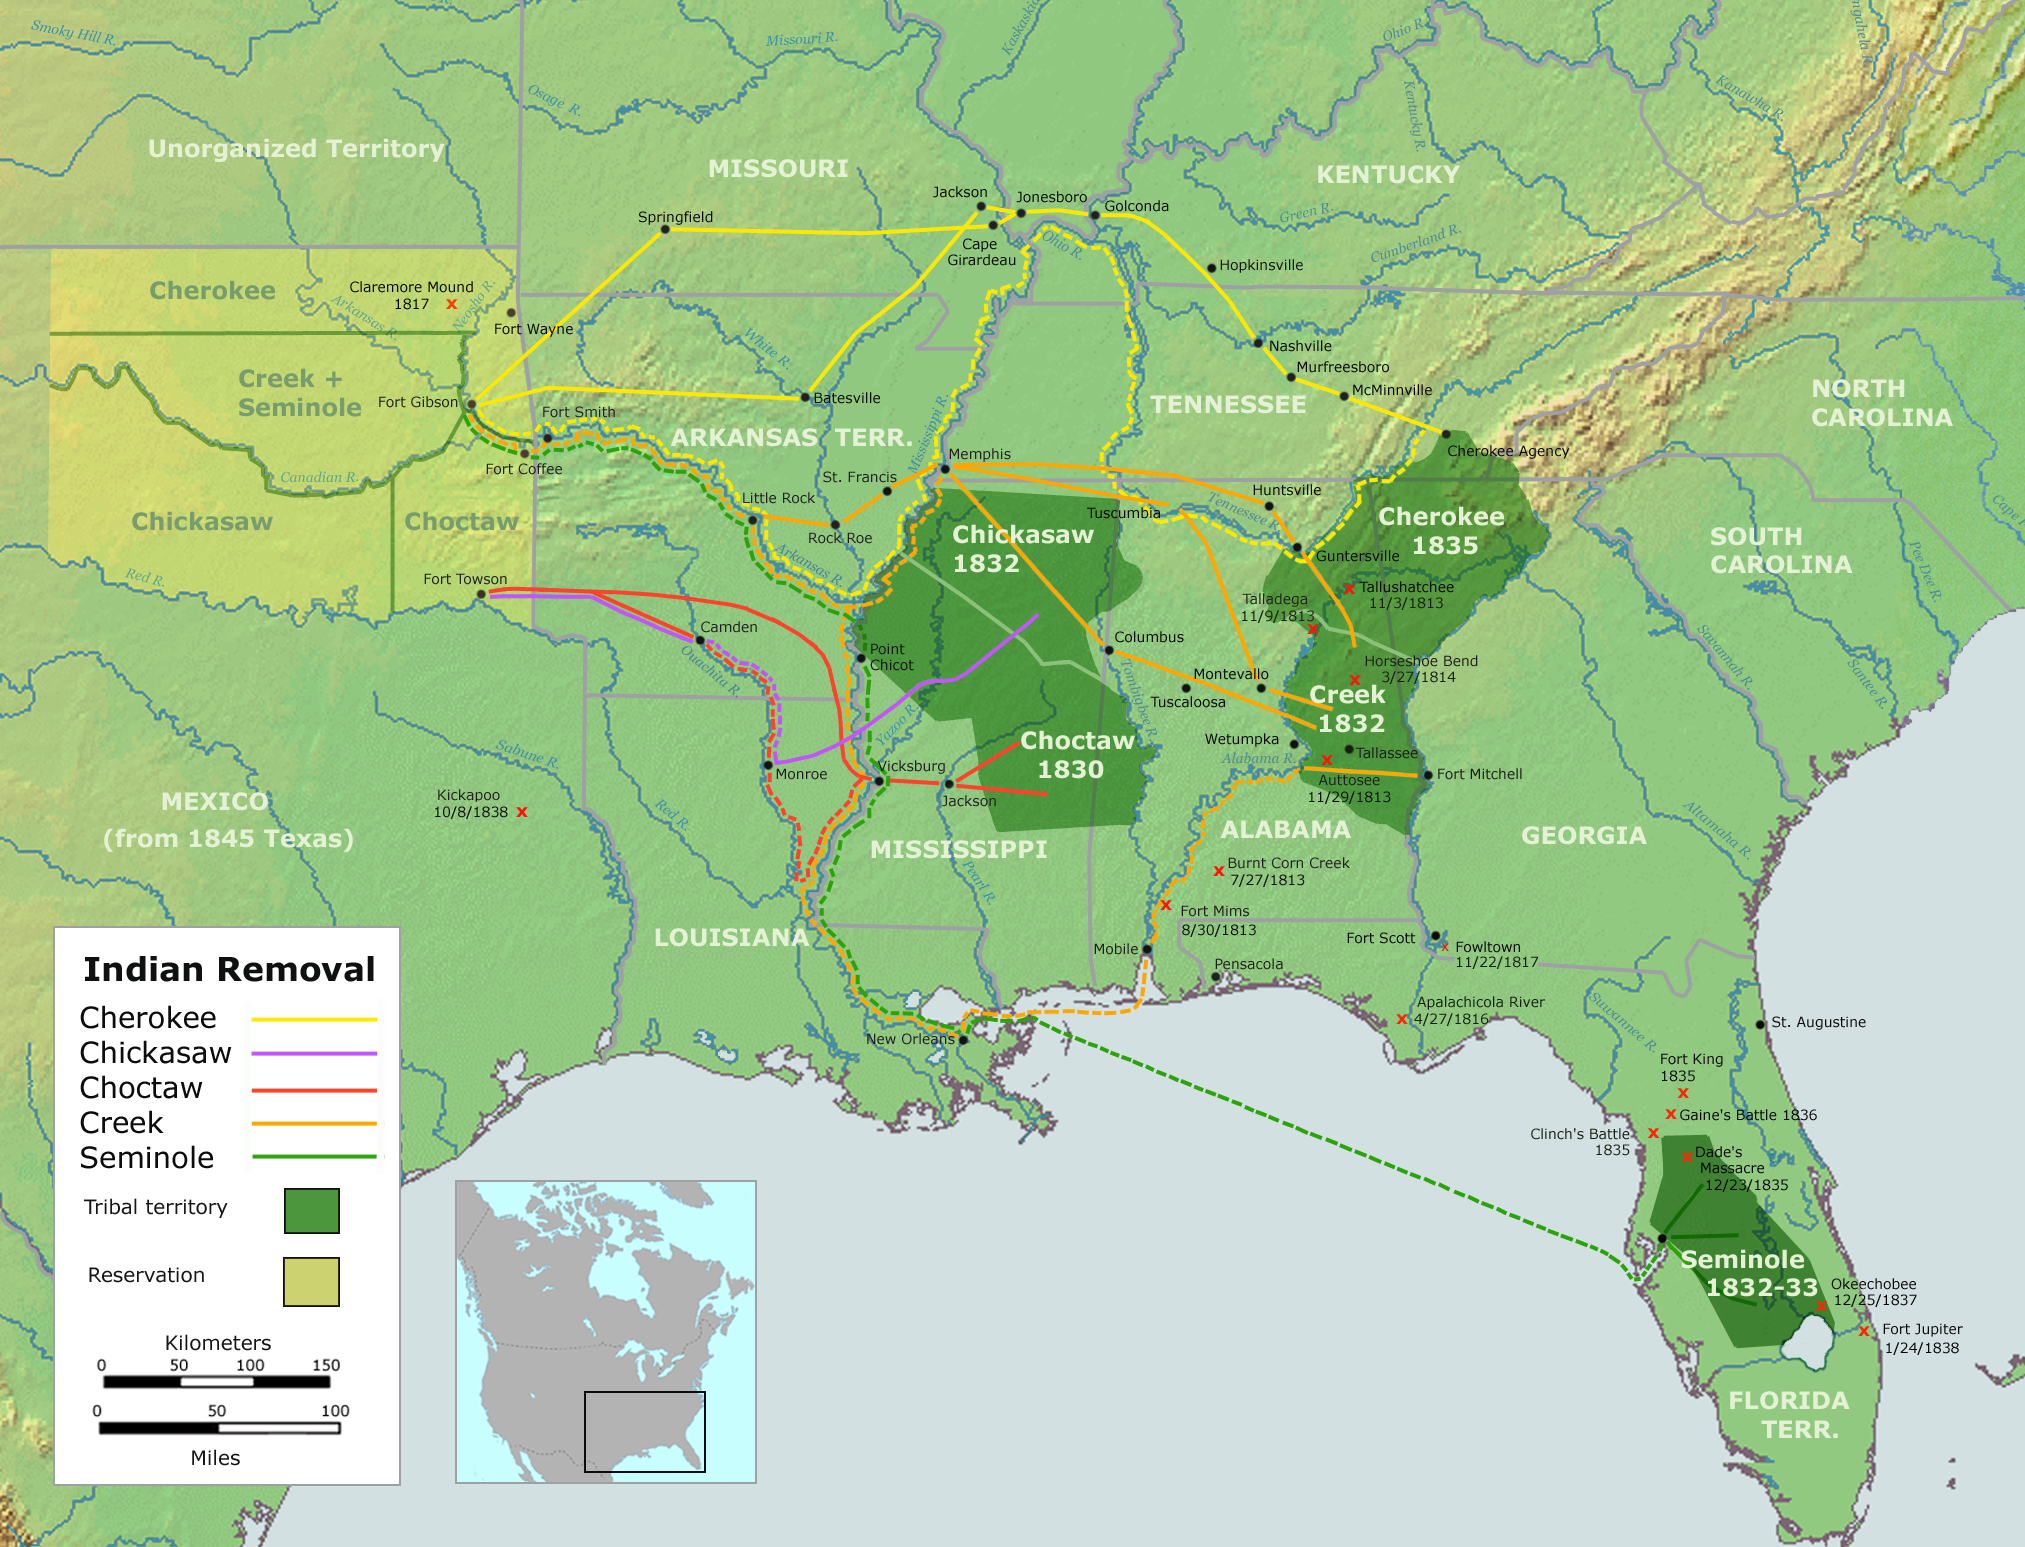 The Indian Removal Act resulted in the transplantation of several Native American tribes and the Trail of Tears.